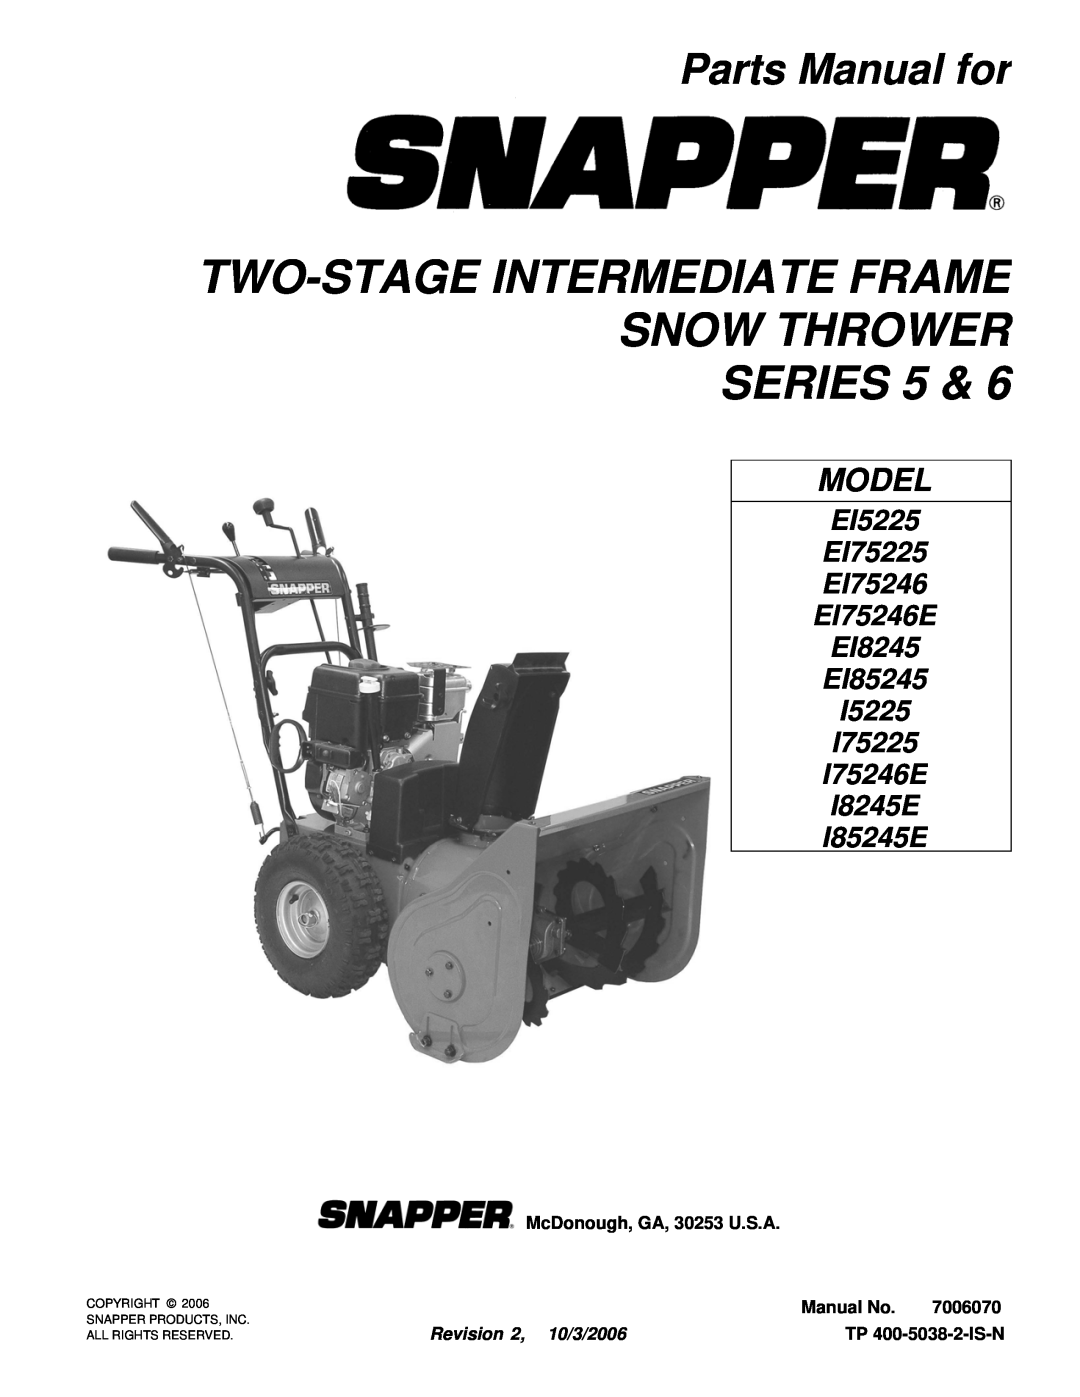 Snapper I5225 manual Two-Stage Intermediate Frame Snow Thrower Series, Parts Manual for, McDonough, GA, 30253 U.S.A, Model 